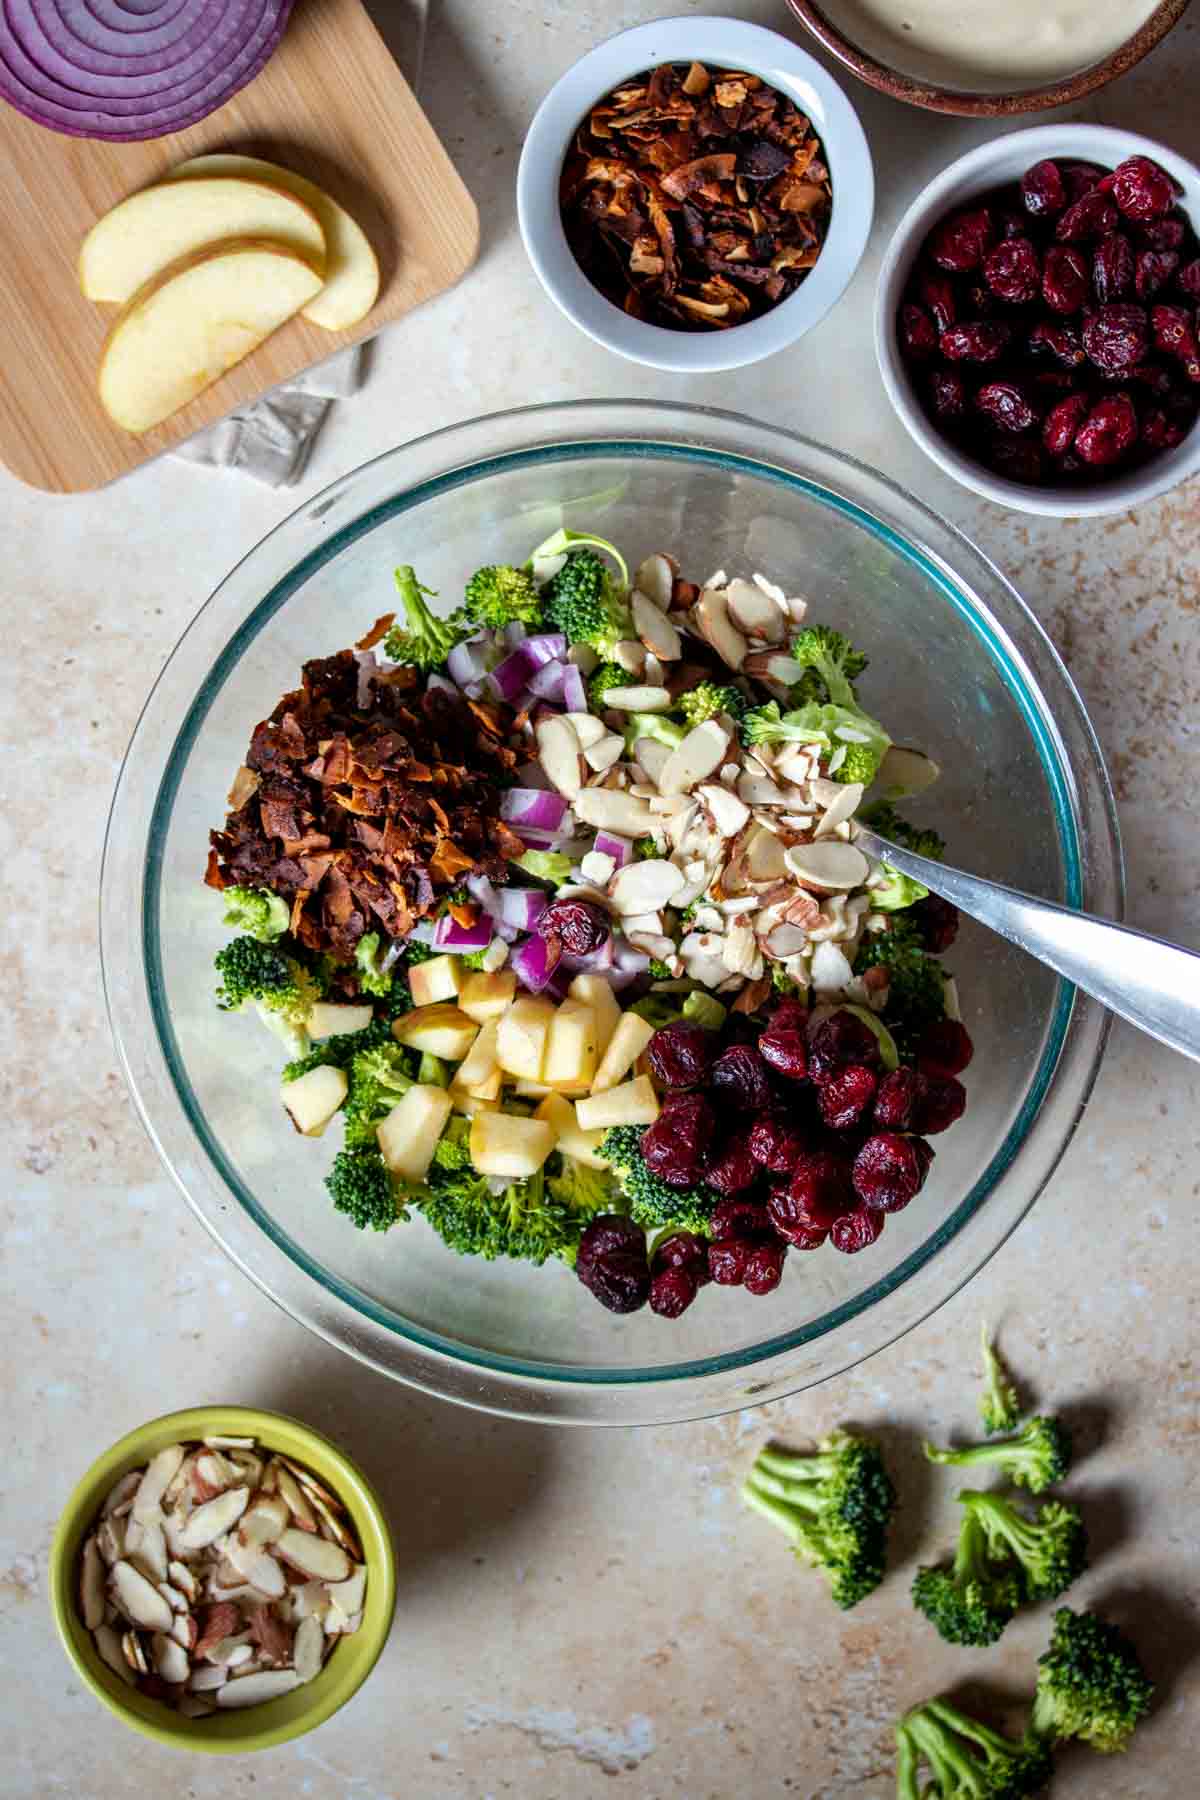 Coconut bacon, cranberries, almonds, red onion, apples and broccoli in a glass bowl surrounded by more of them in bowls on a tan surface.